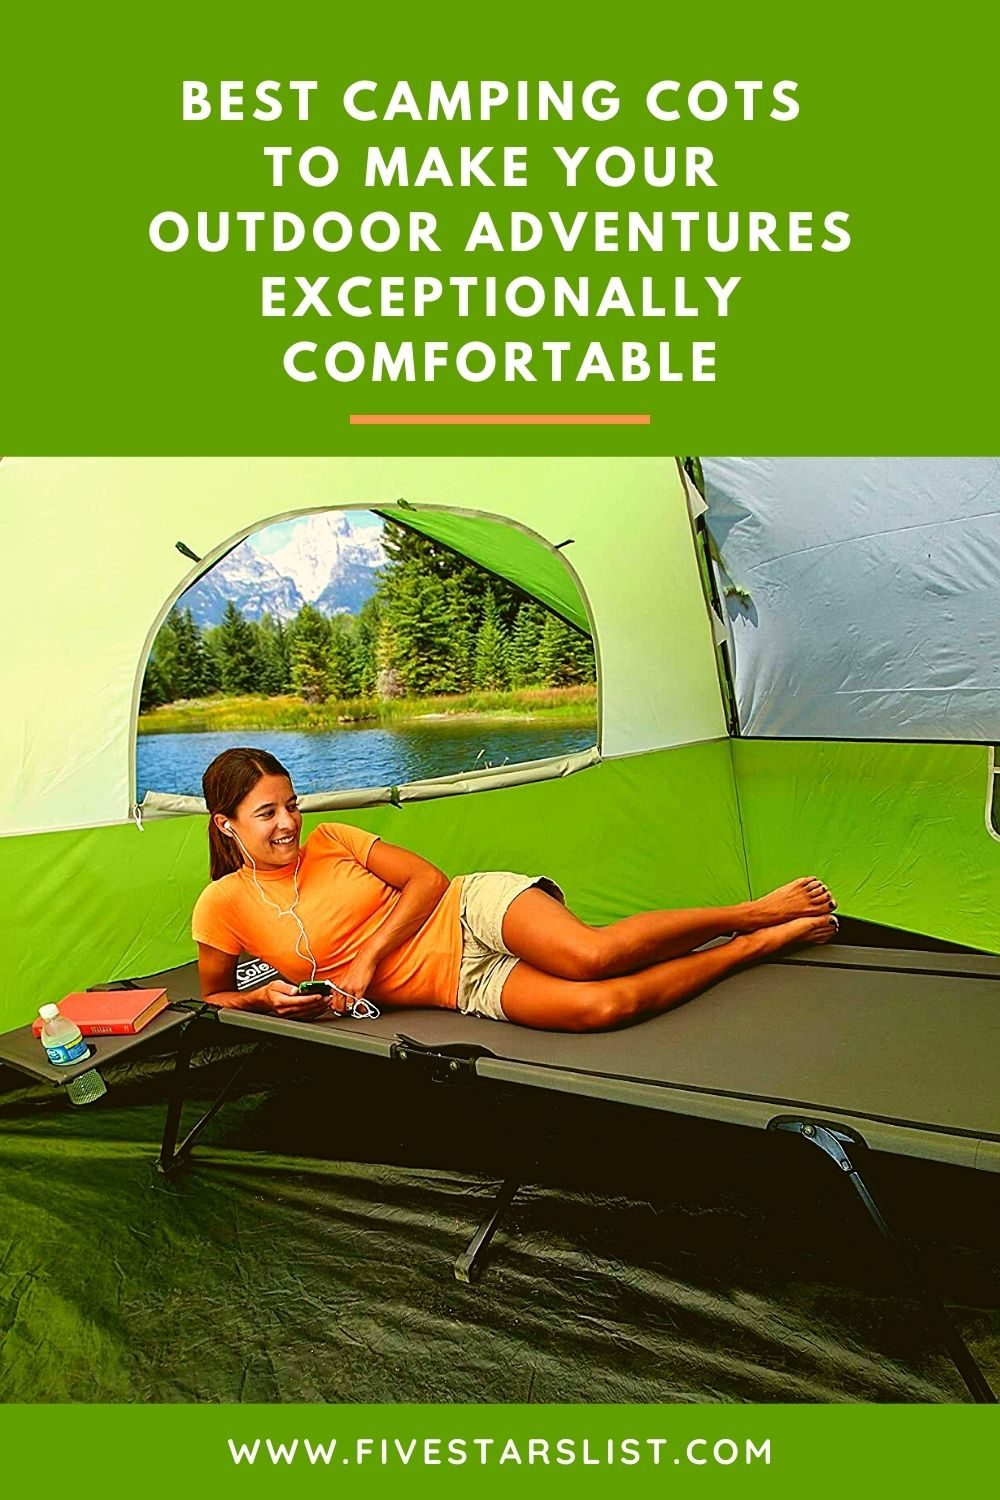 Best Camping Cots to Make Your Outdoor Adventures Exceptionally Comfortable